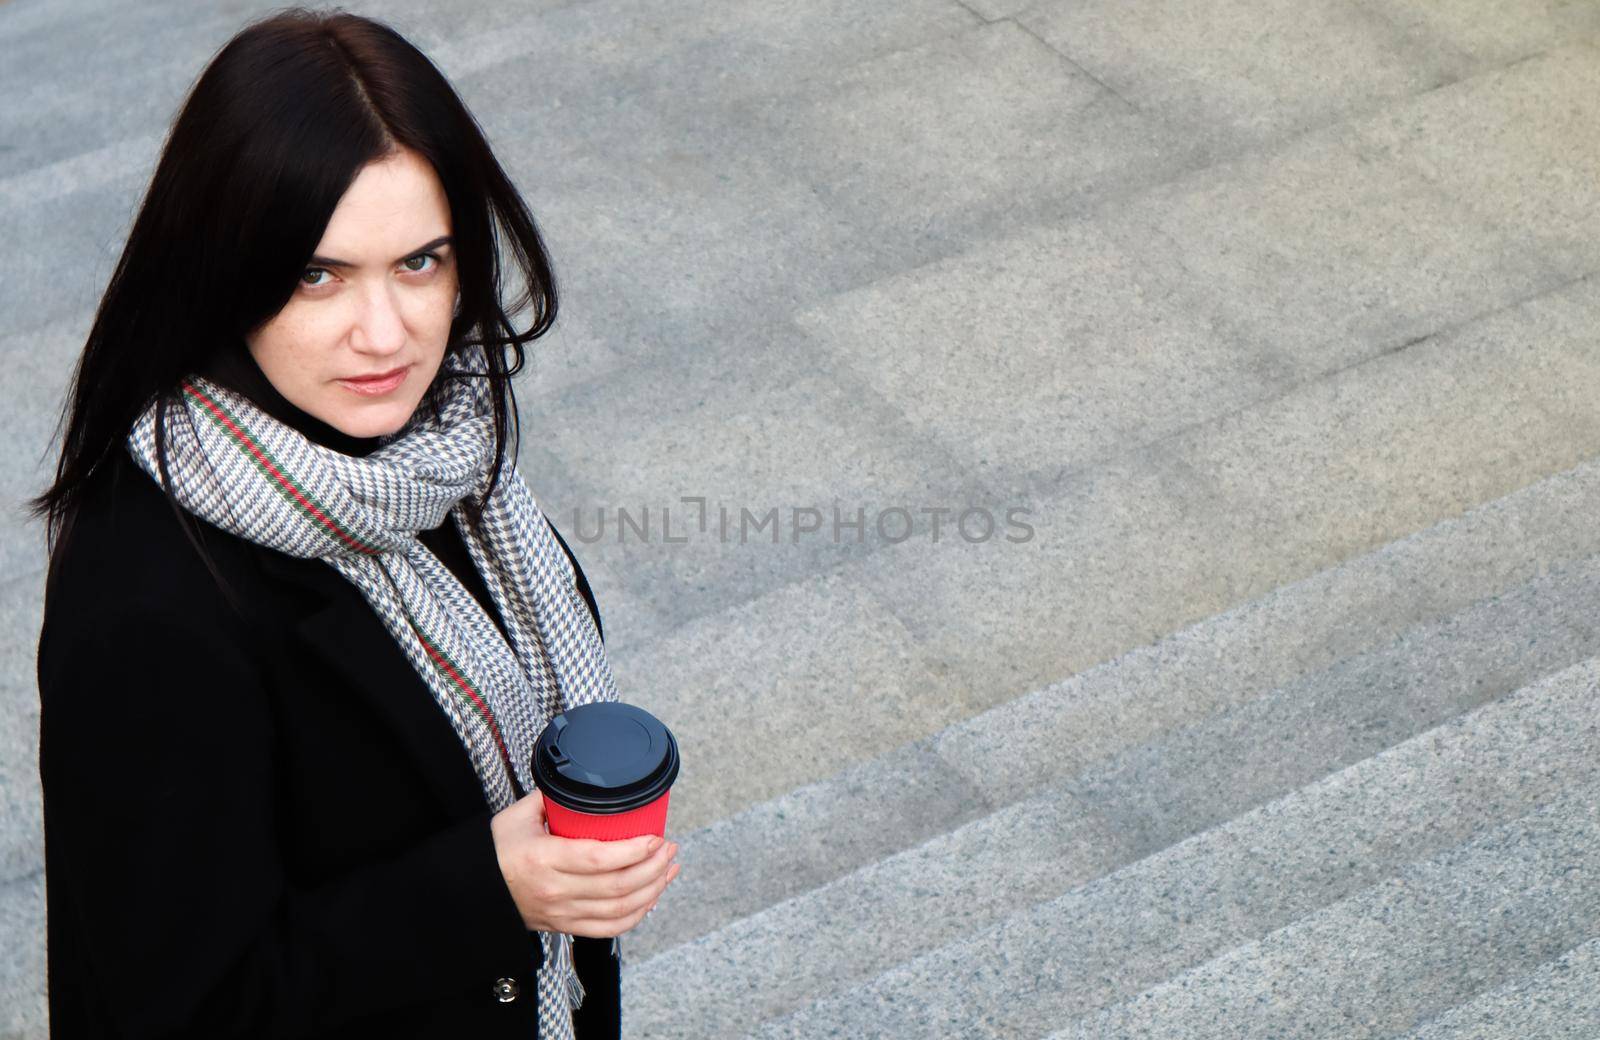 Young stylish woman in a coat and scarf drinks morning hot coffee in a red eco paper glass outdoors in an autumn park. Portrait of a young woman holding a takeaway coffee cup, shallow depth of field.